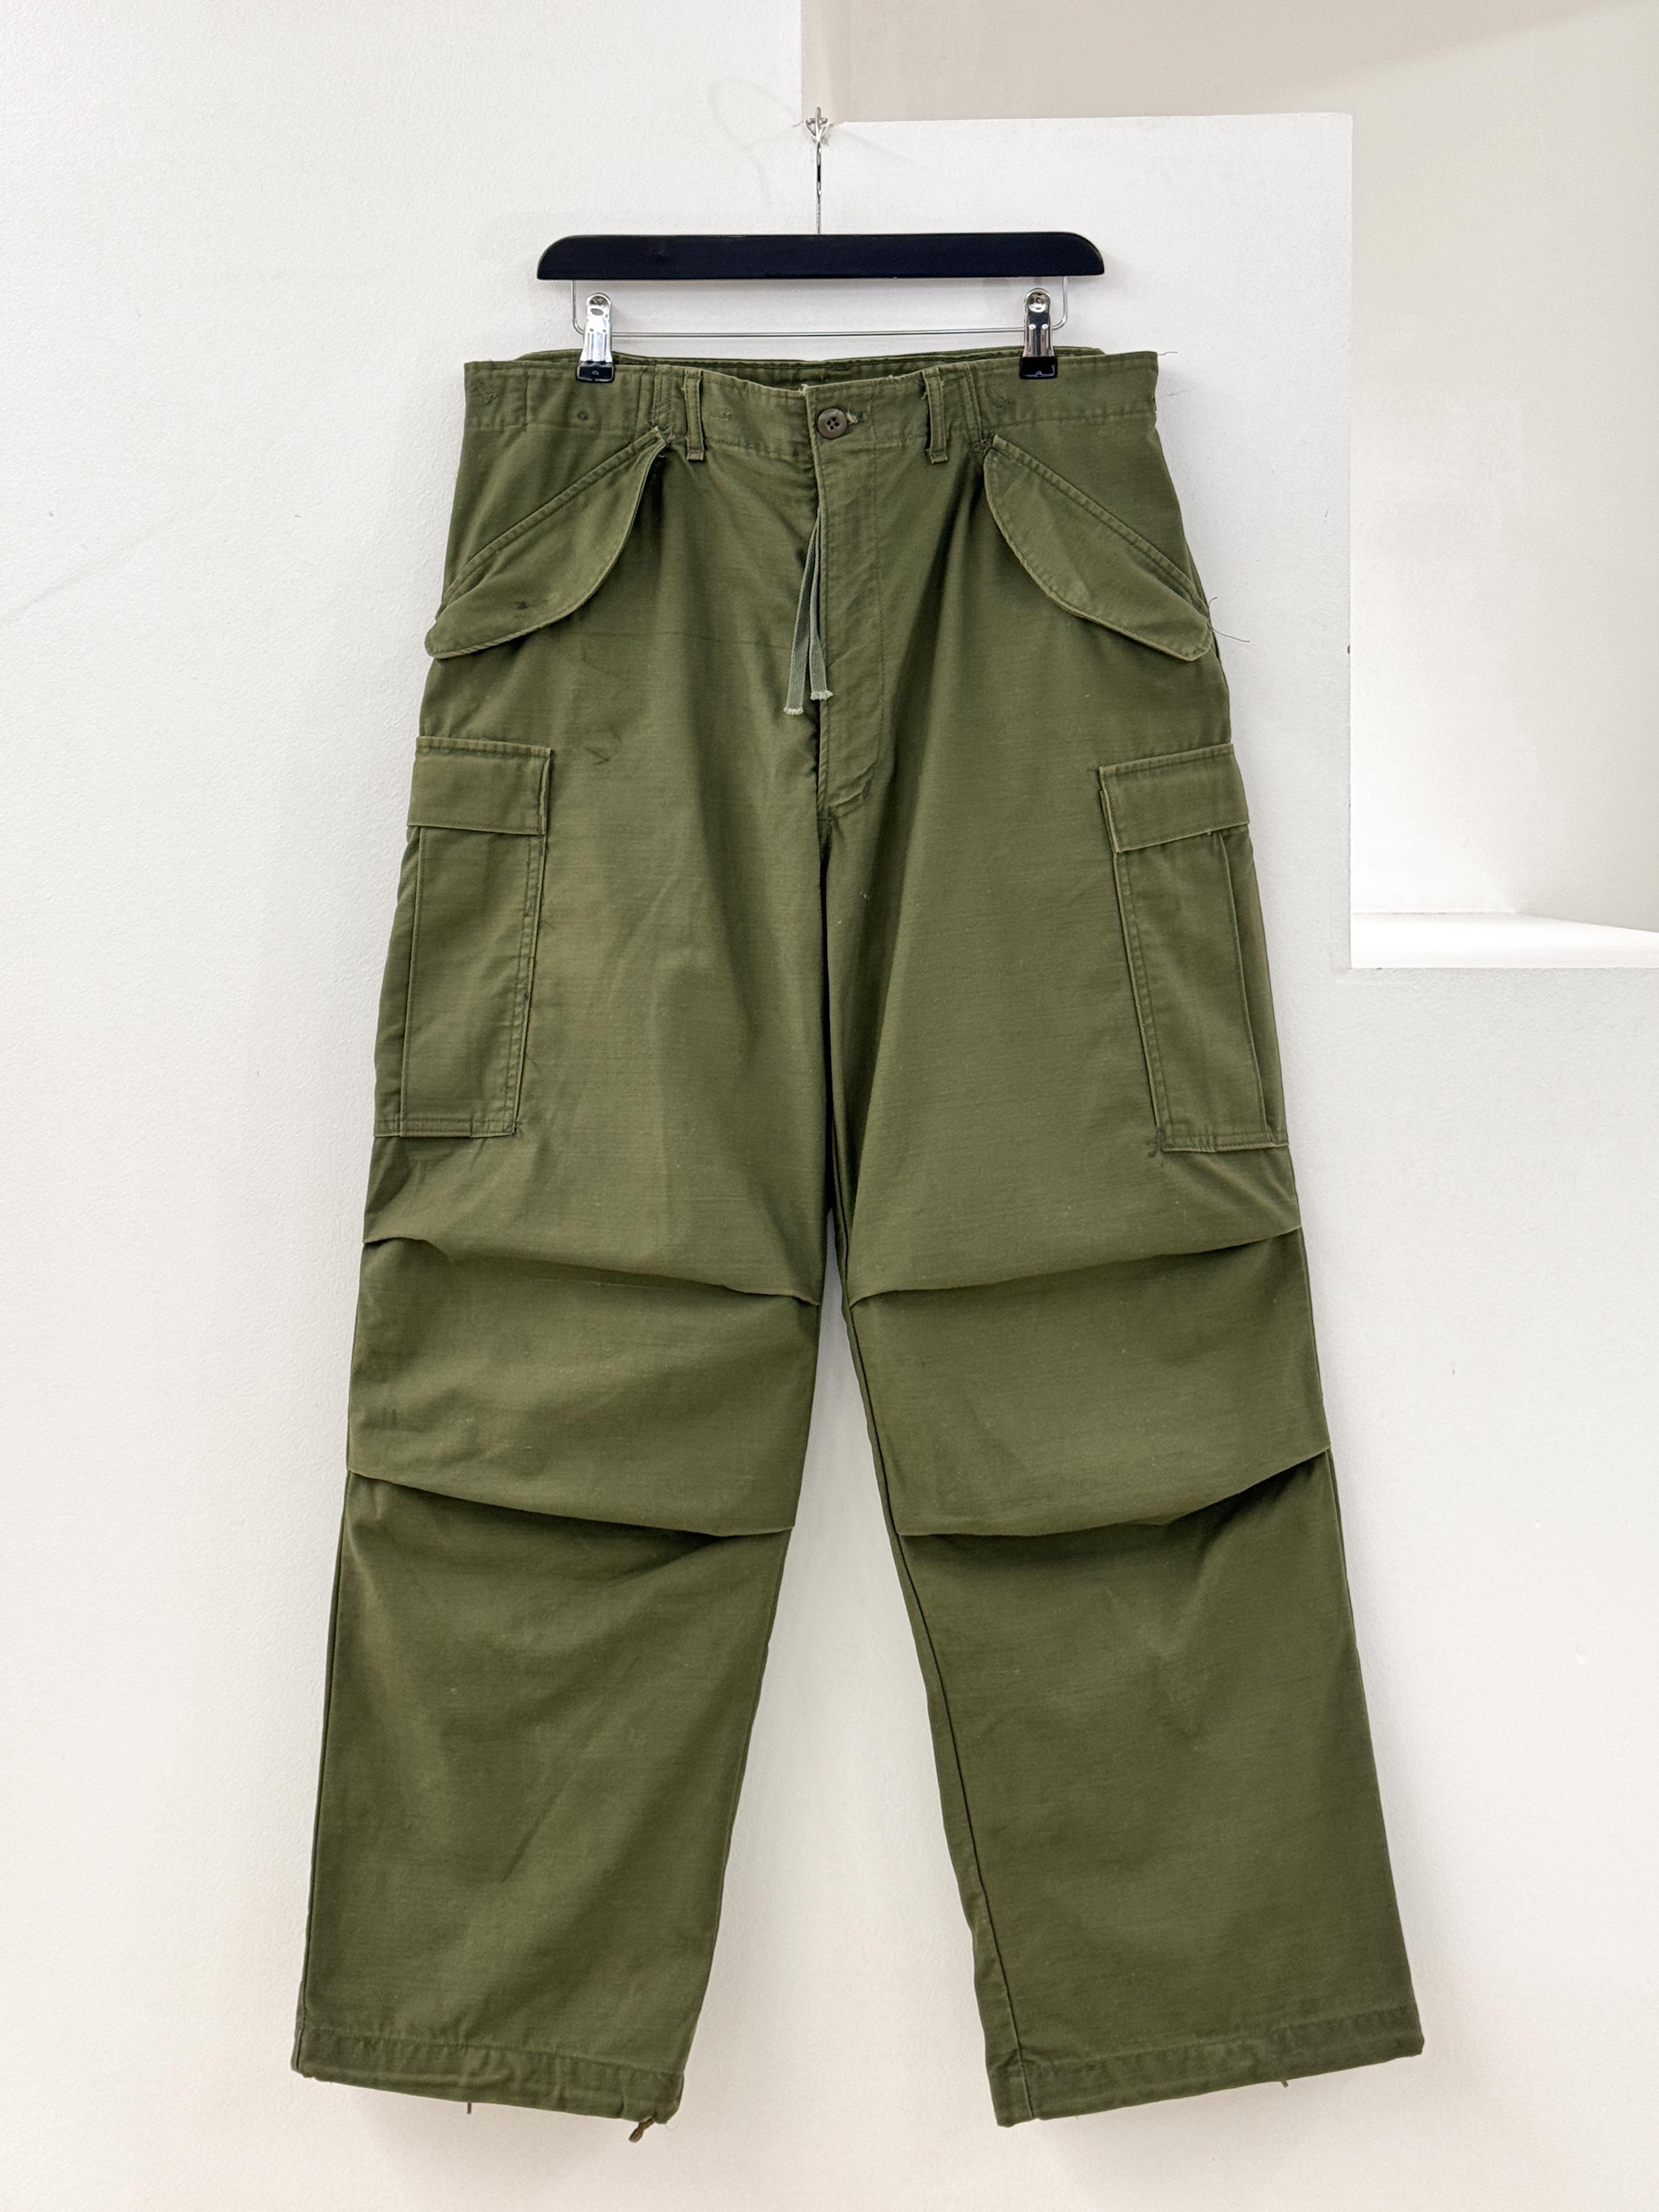 US ARMY M-65 trousers 31-35